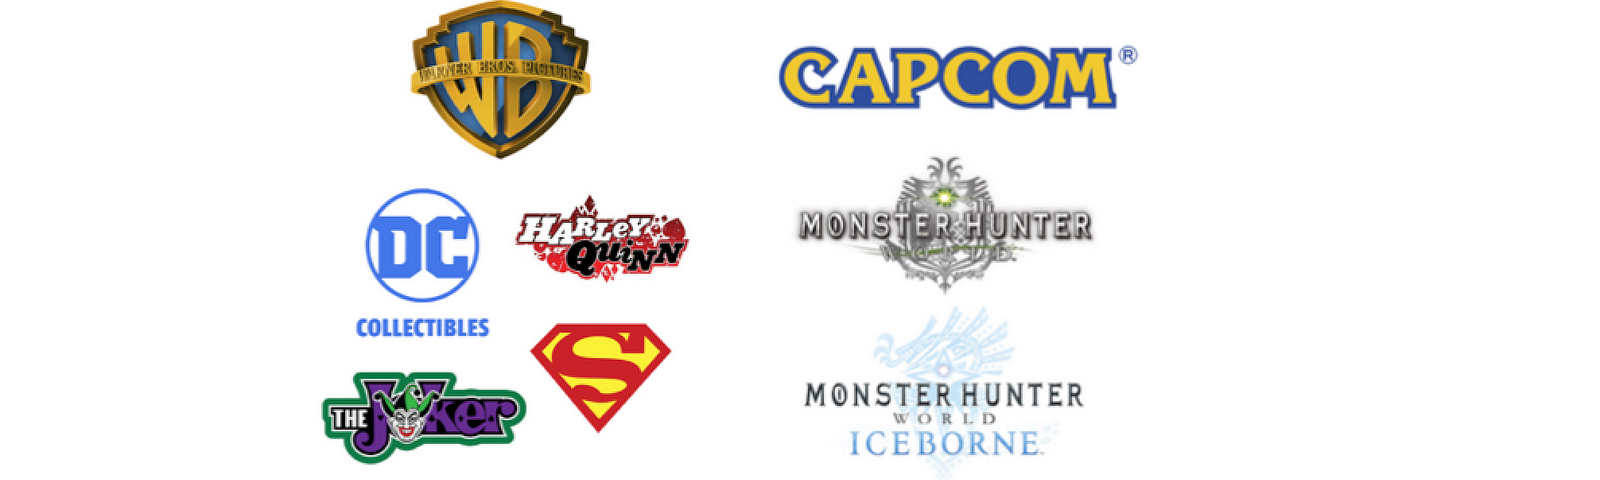 VE-VE announces Warner Brothers and Capcom digital collectibles